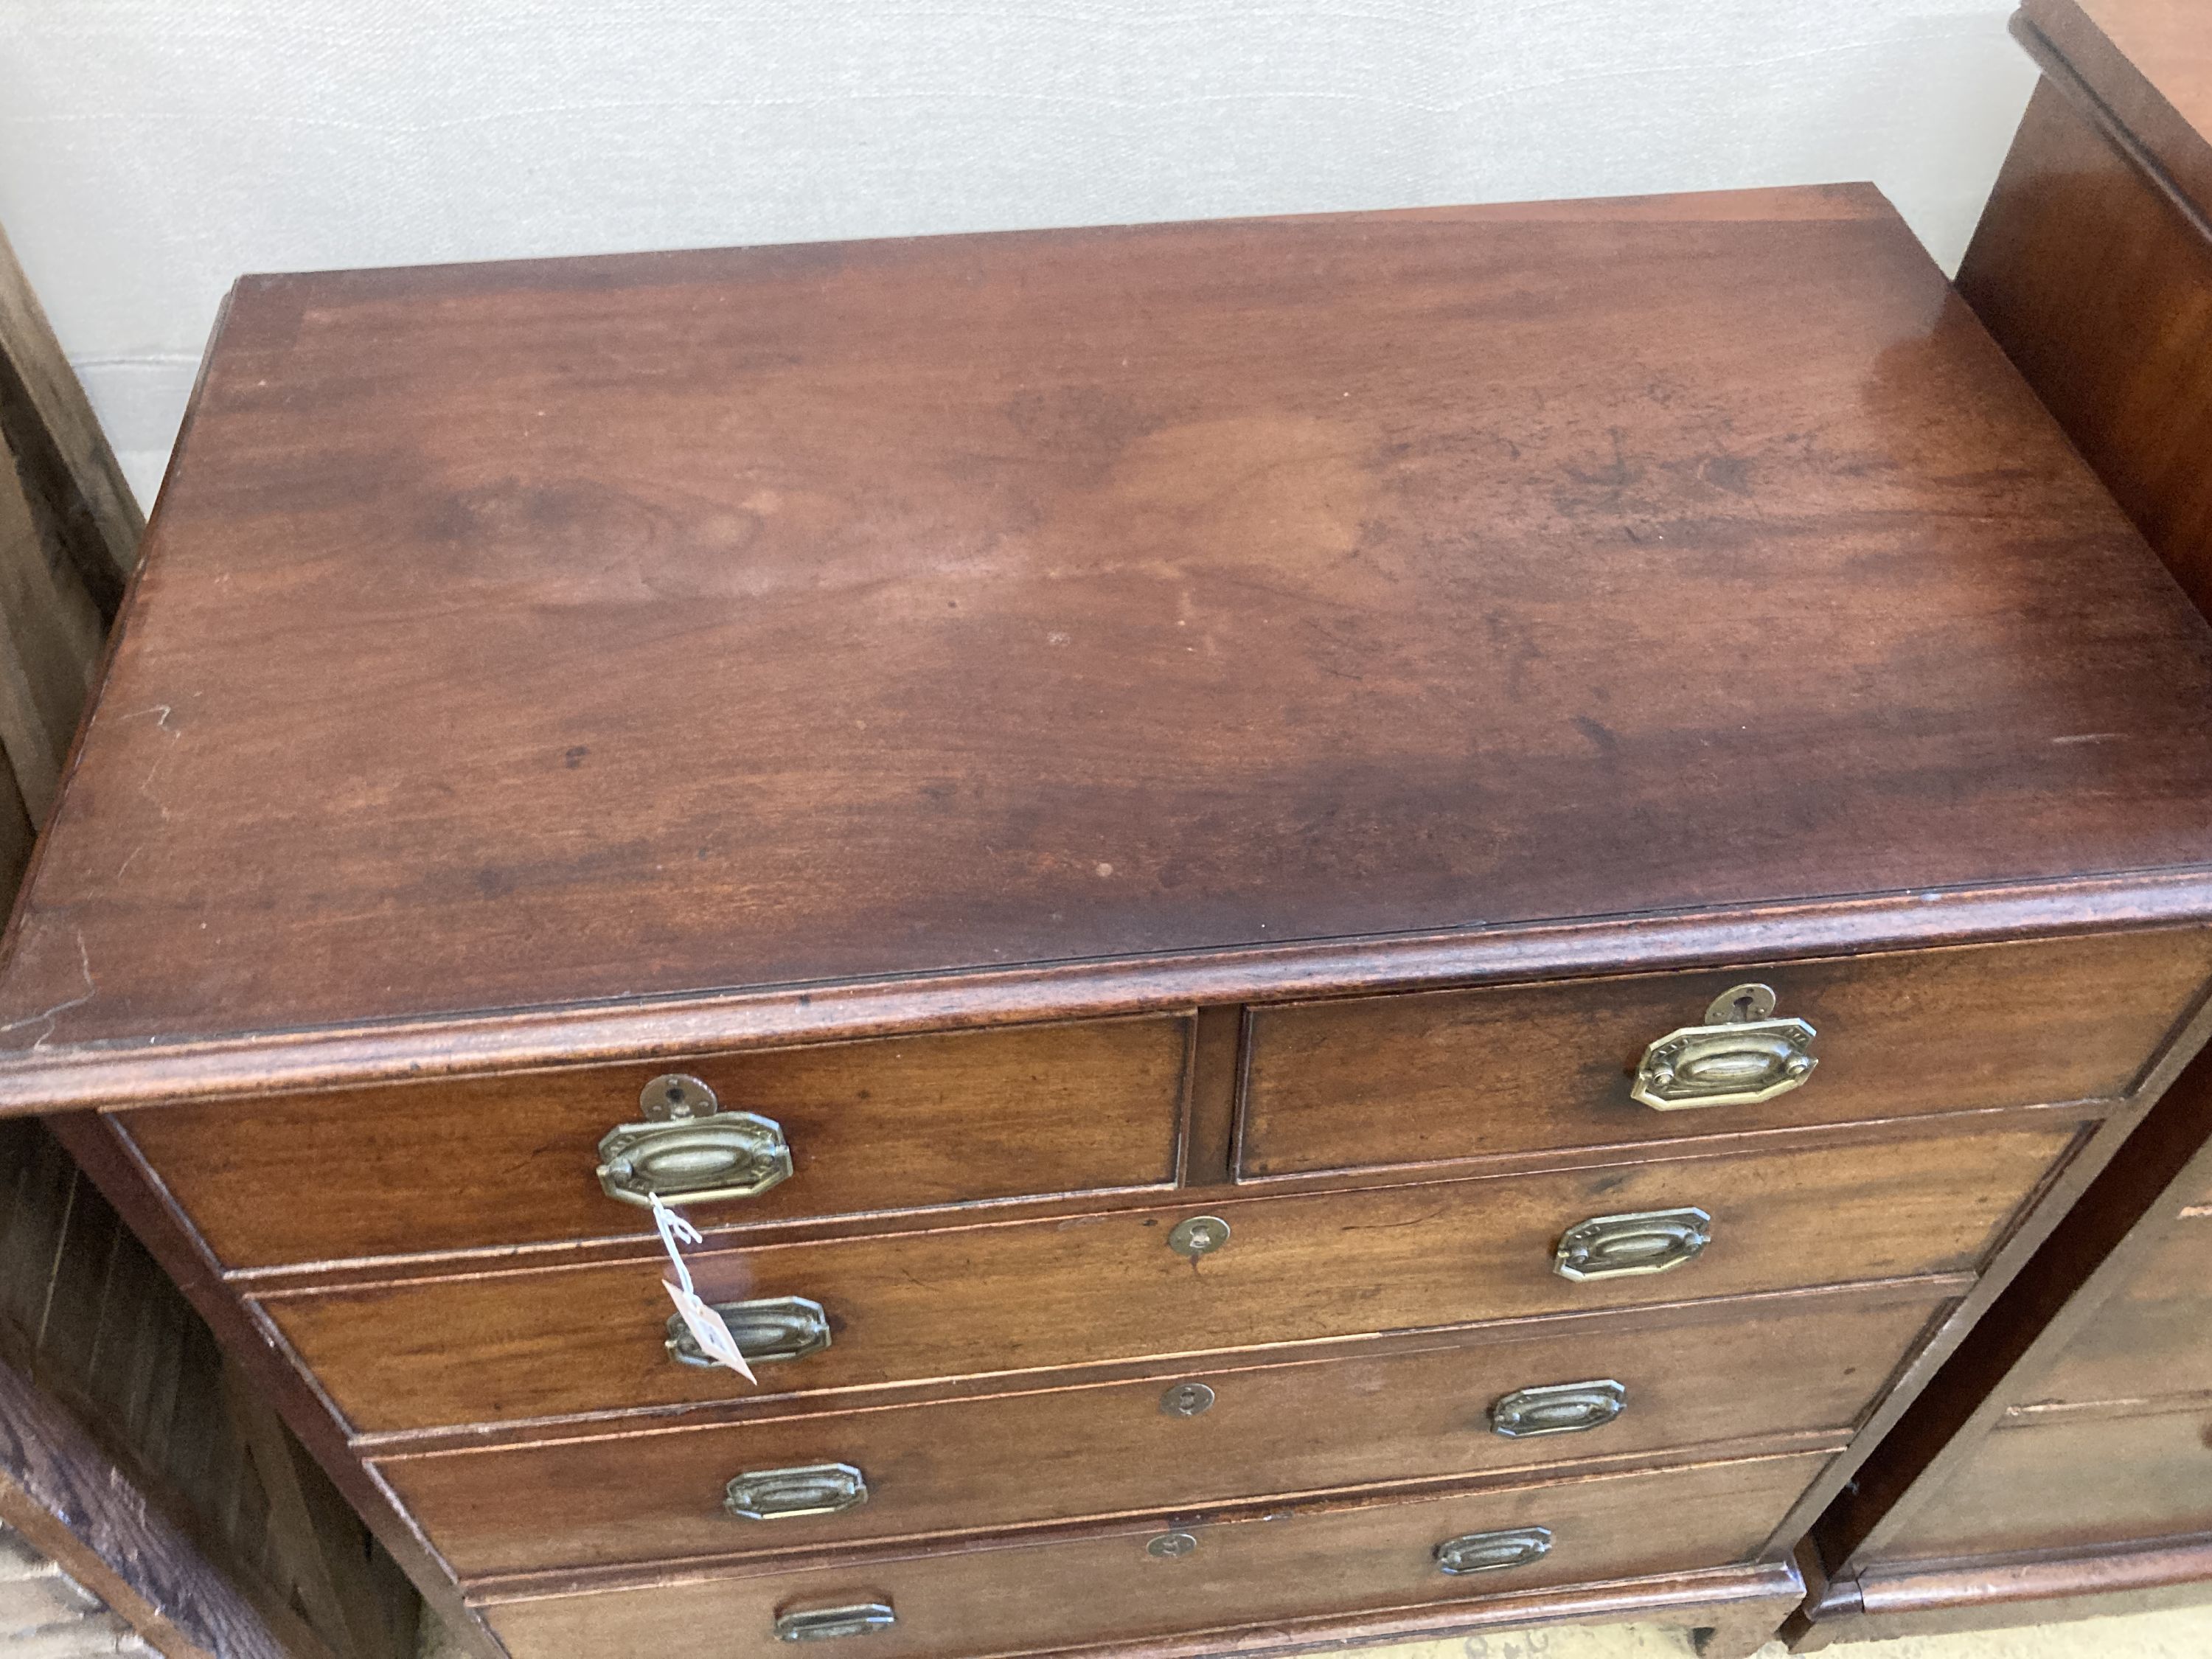 A George III mahogany chest of drawers, width 95cm, depth 53cm, height 97cm